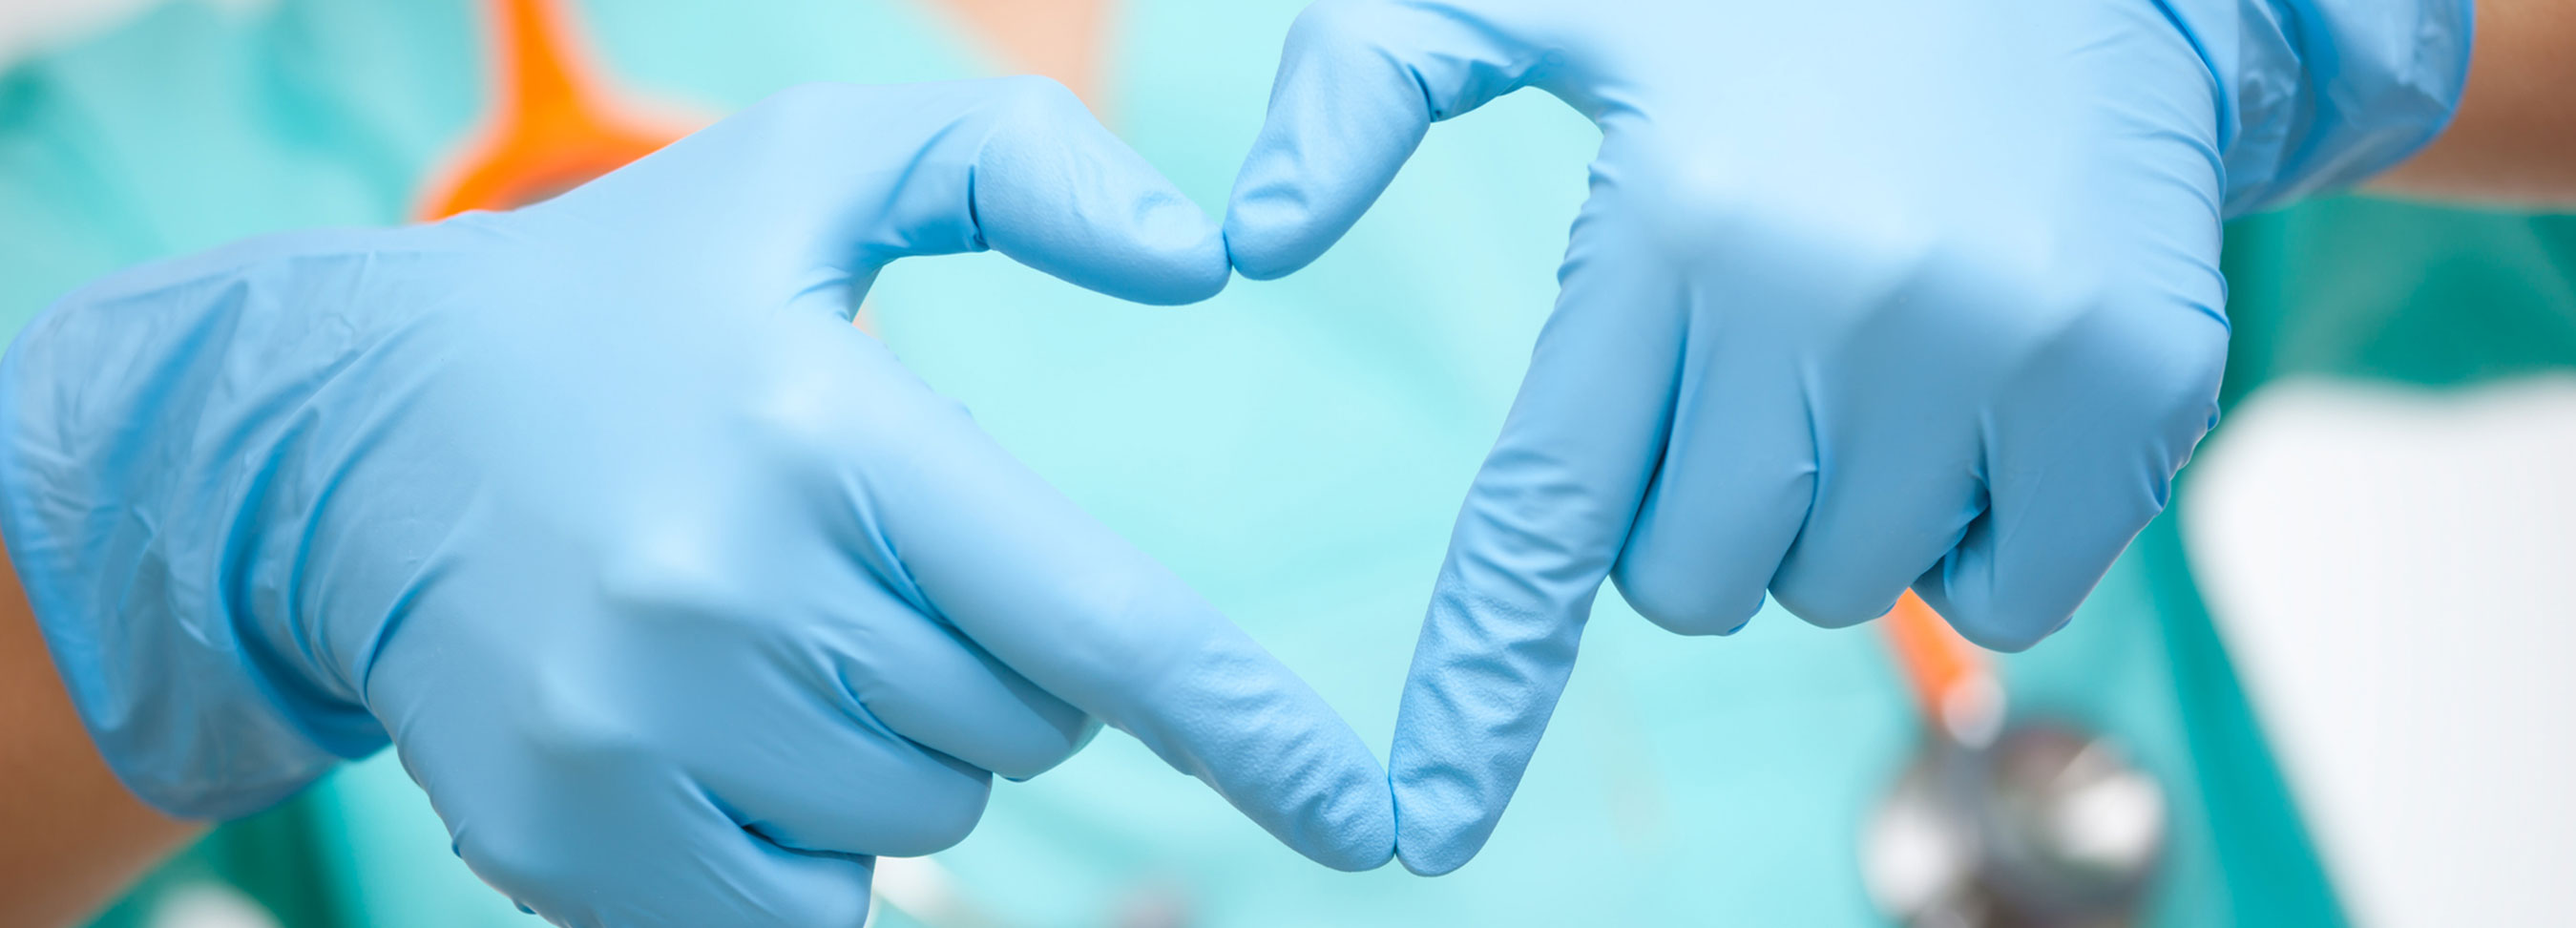 Image of hands in surgical gloves making the shape of a heart